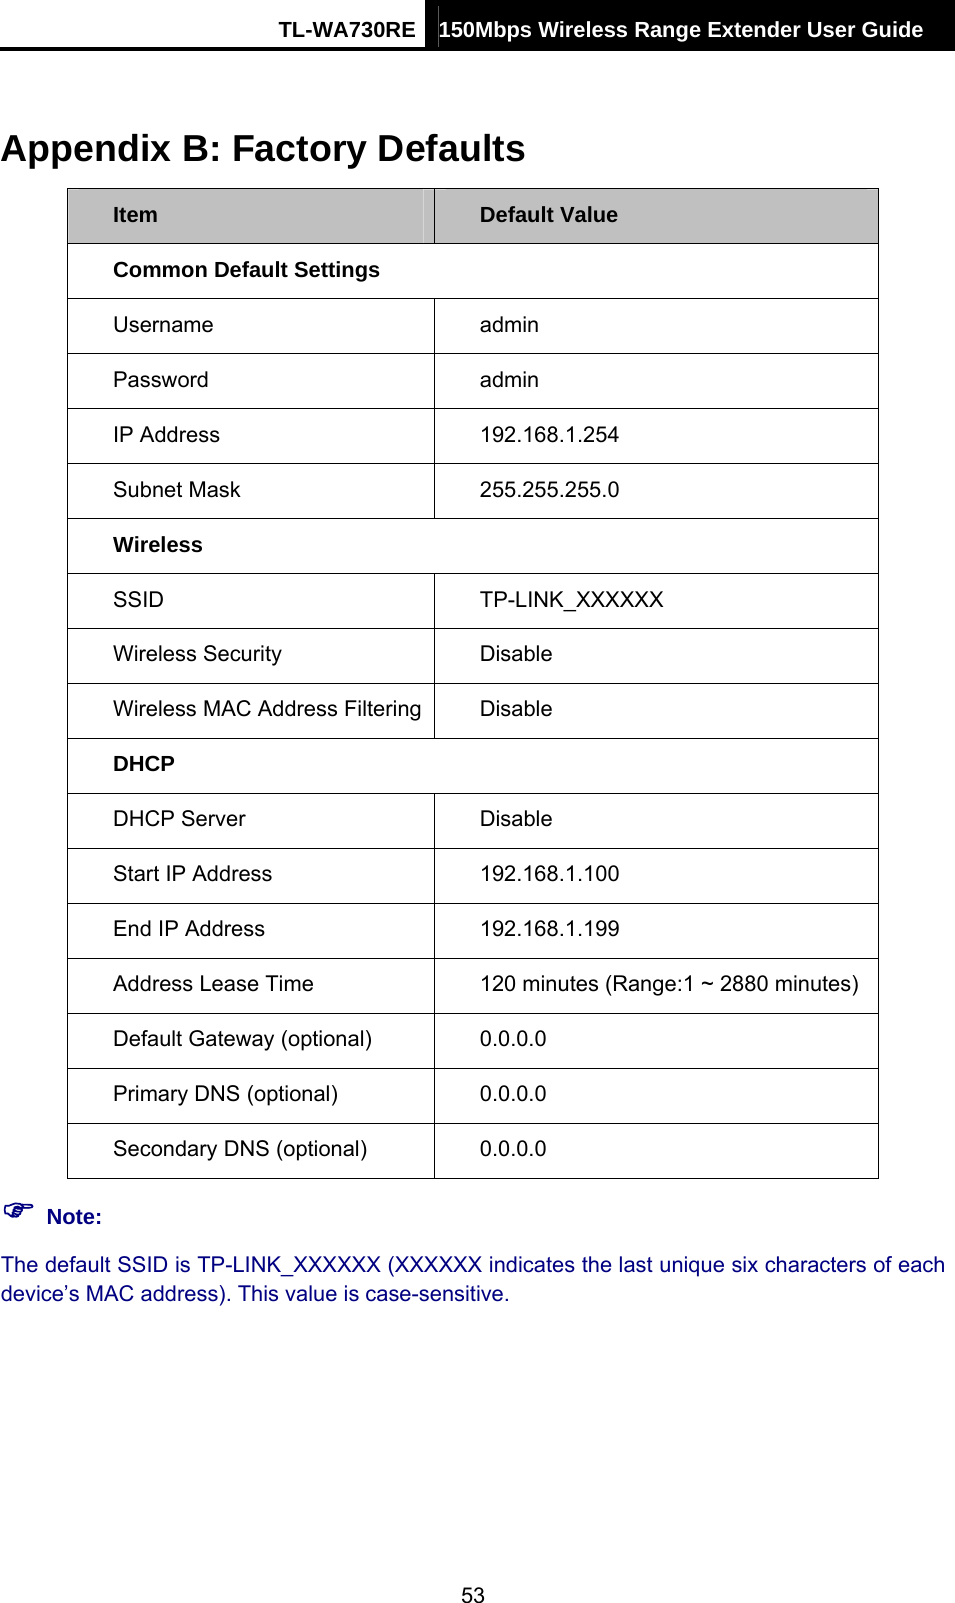 TL-WA730RE 150Mbps Wireless Range Extender User Guide  Appendix B: Factory Defaults Item  Default Value Common Default Settings Username   admin Password  admin IP Address  192.168.1.254 Subnet Mask    255.255.255.0 Wireless SSID  TP-LINK_XXXXXX Wireless Security  Disable Wireless MAC Address Filtering  Disable DHCP DHCP Server  Disable Start IP Address  192.168.1.100 End IP Address  192.168.1.199 Address Lease Time  120 minutes (Range:1 ~ 2880 minutes) Default Gateway (optional)    0.0.0.0 Primary DNS (optional)  0.0.0.0 Secondary DNS (optional)    0.0.0.0 ) Note: The default SSID is TP-LINK_XXXXXX (XXXXXX indicates the last unique six characters of each device’s MAC address). This value is case-sensitive. 53 